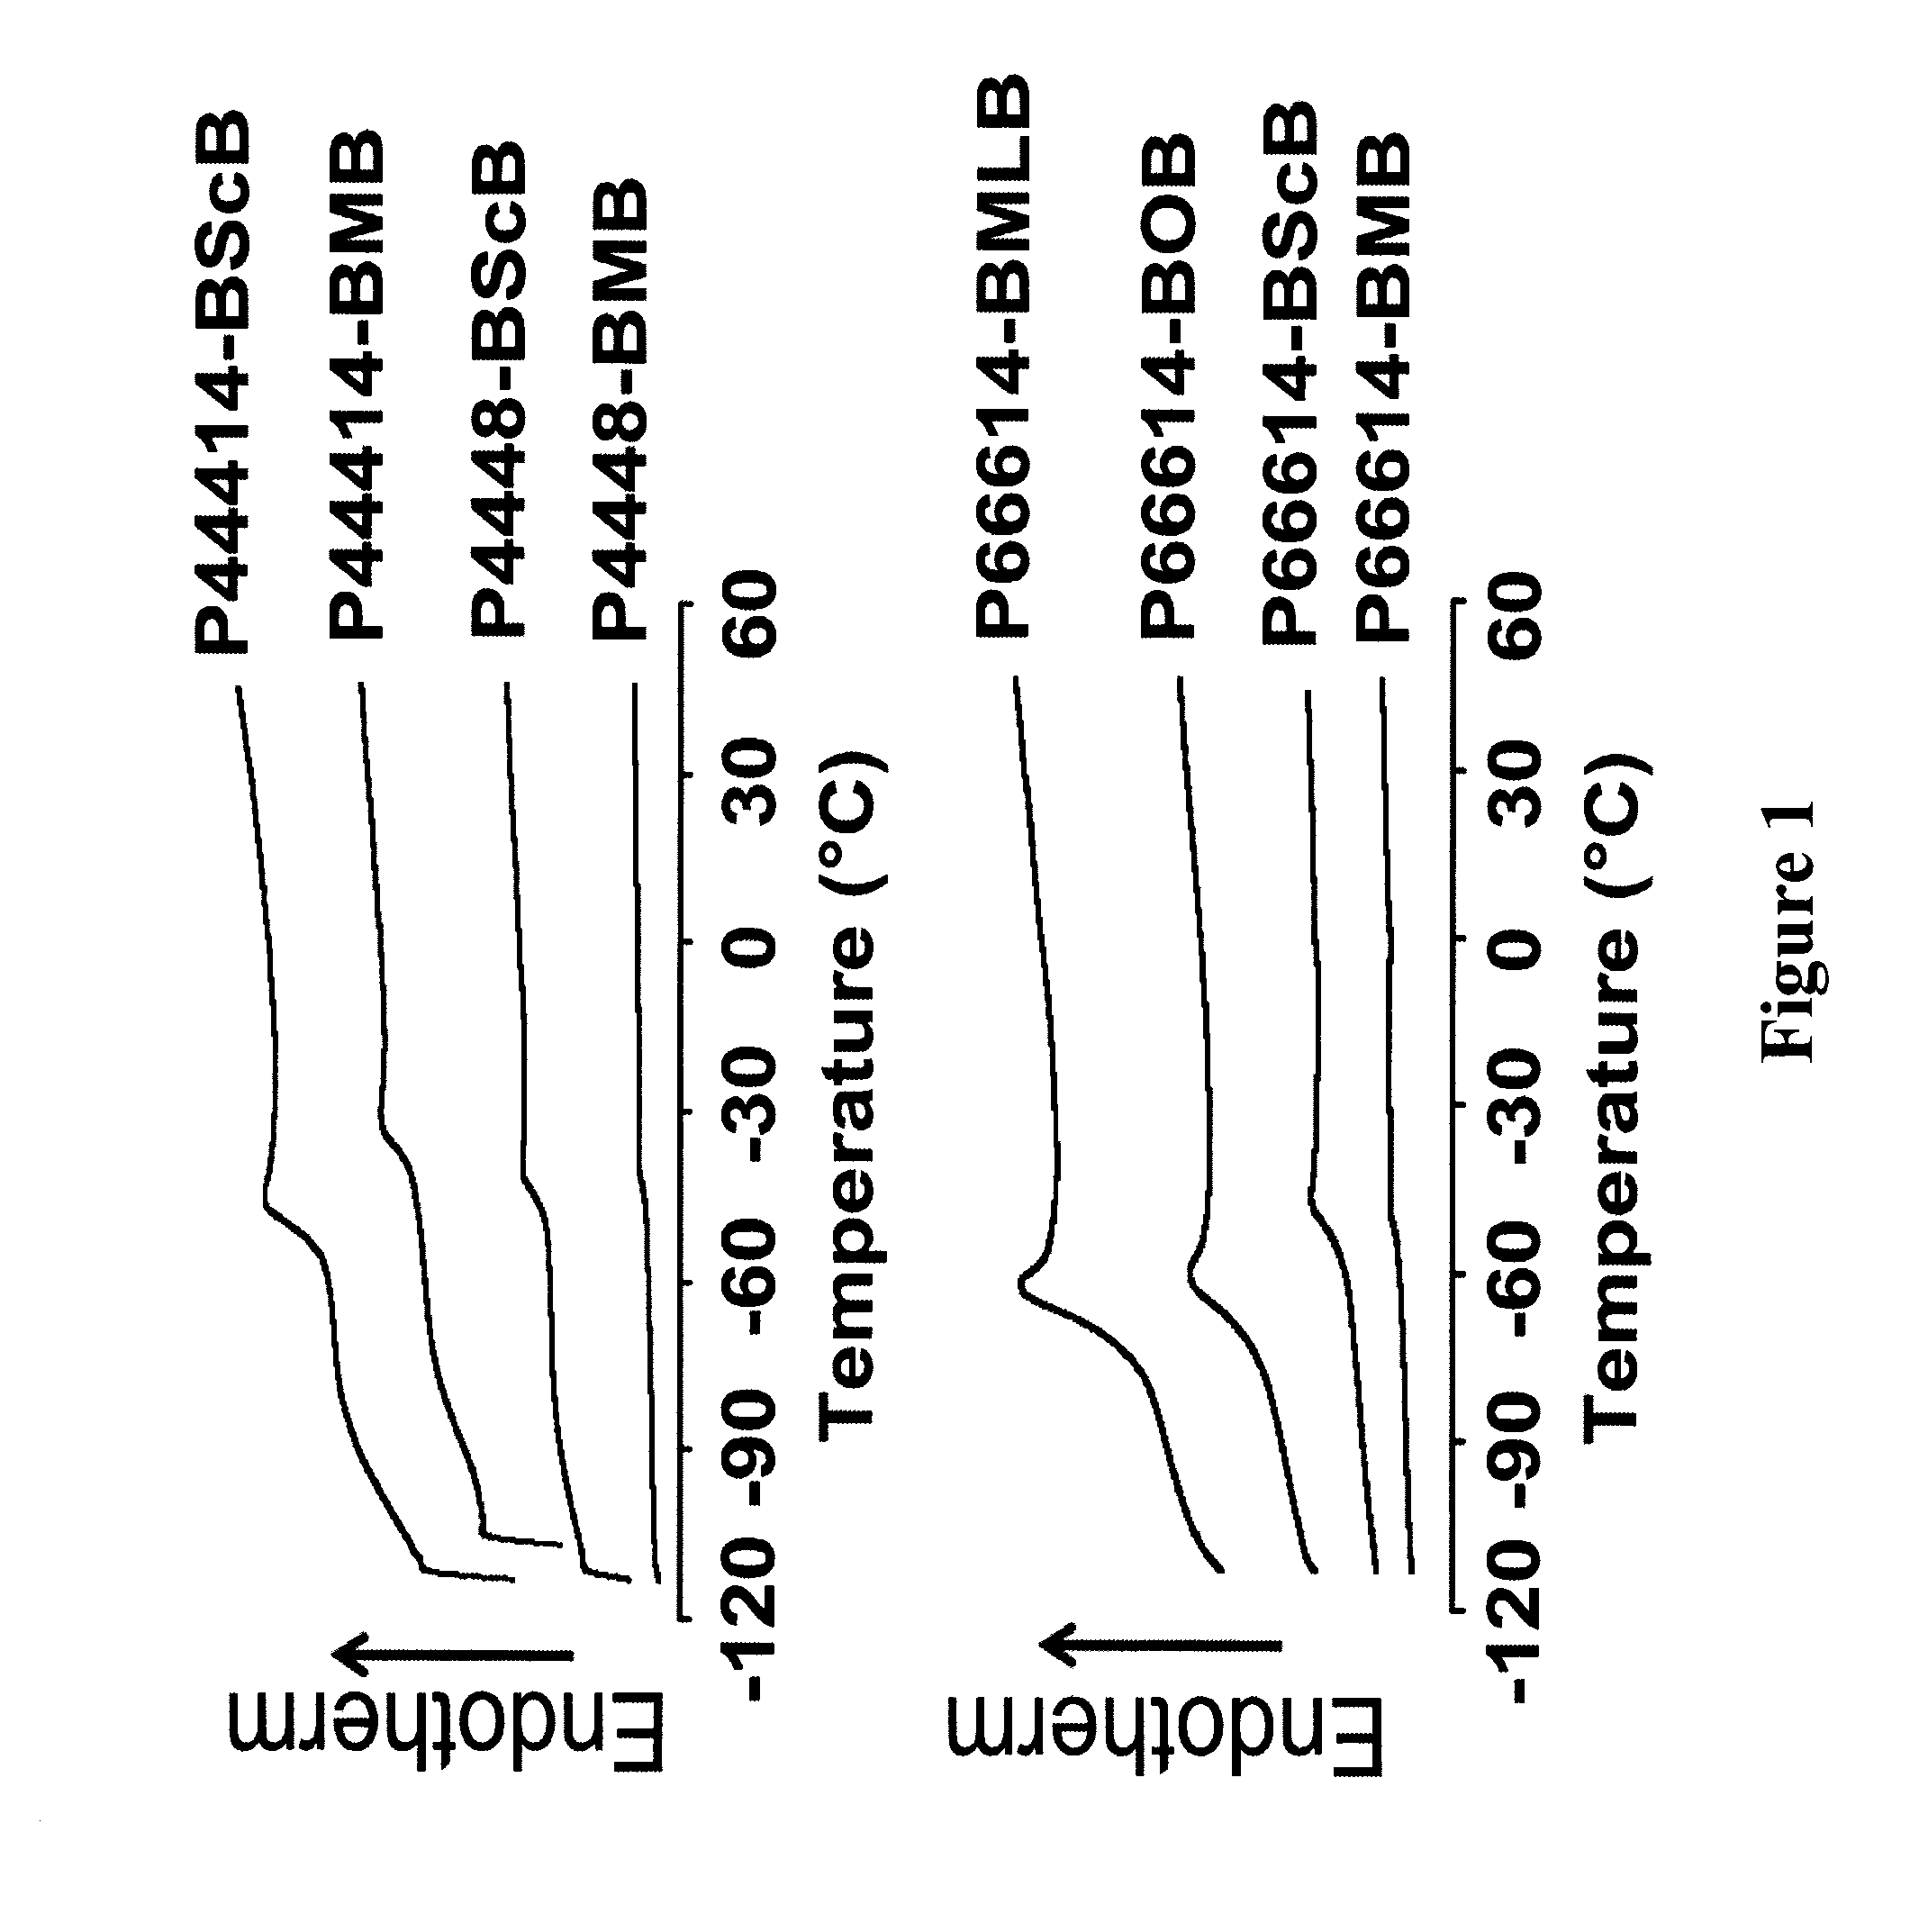 Ionic-liquid-based lubricants and lubrication additives comprising ions